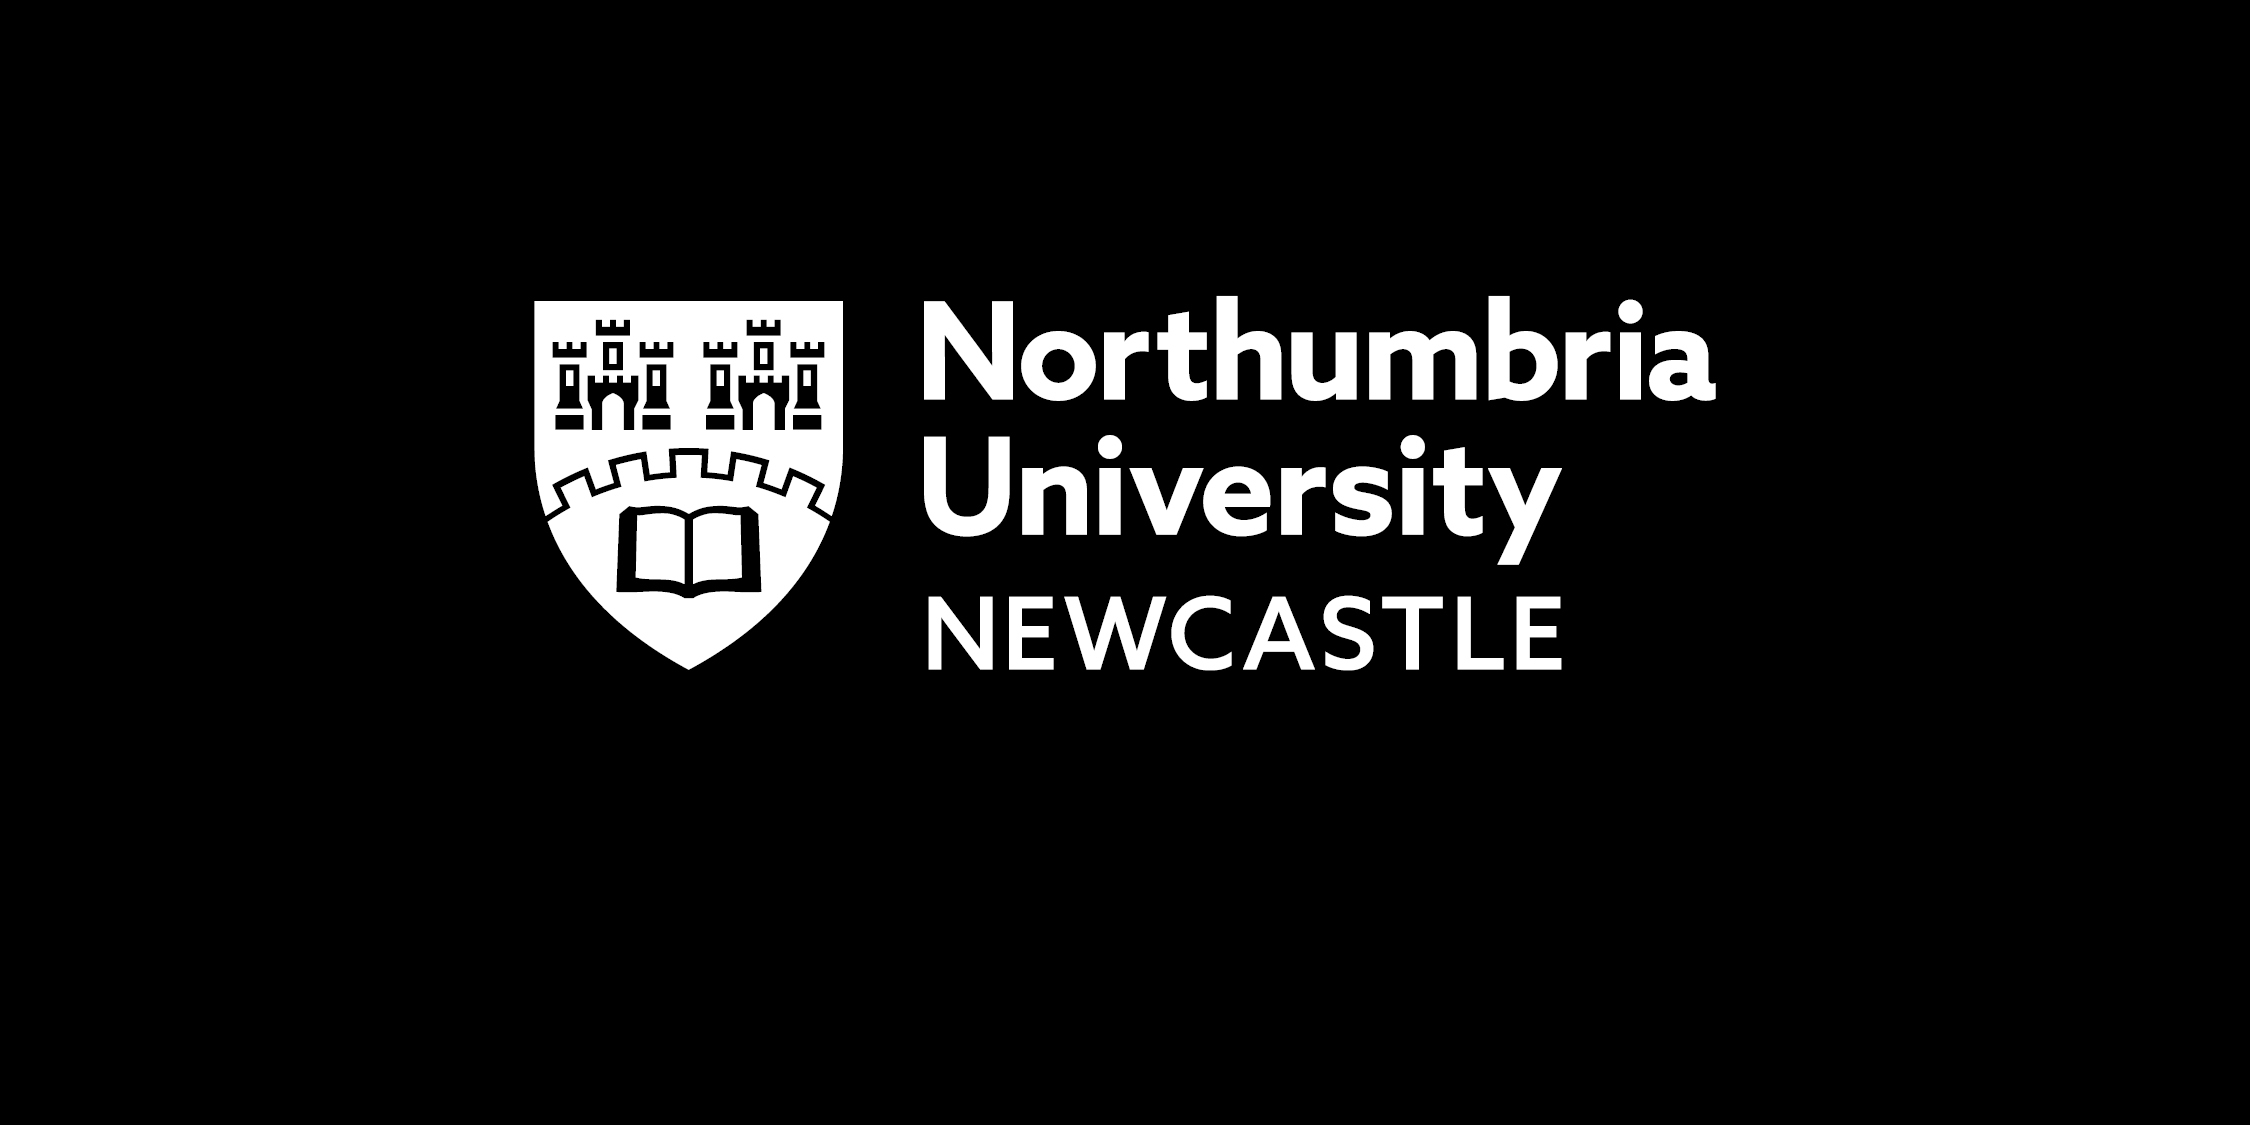 Physiotherapy Curriculum at Northumbria